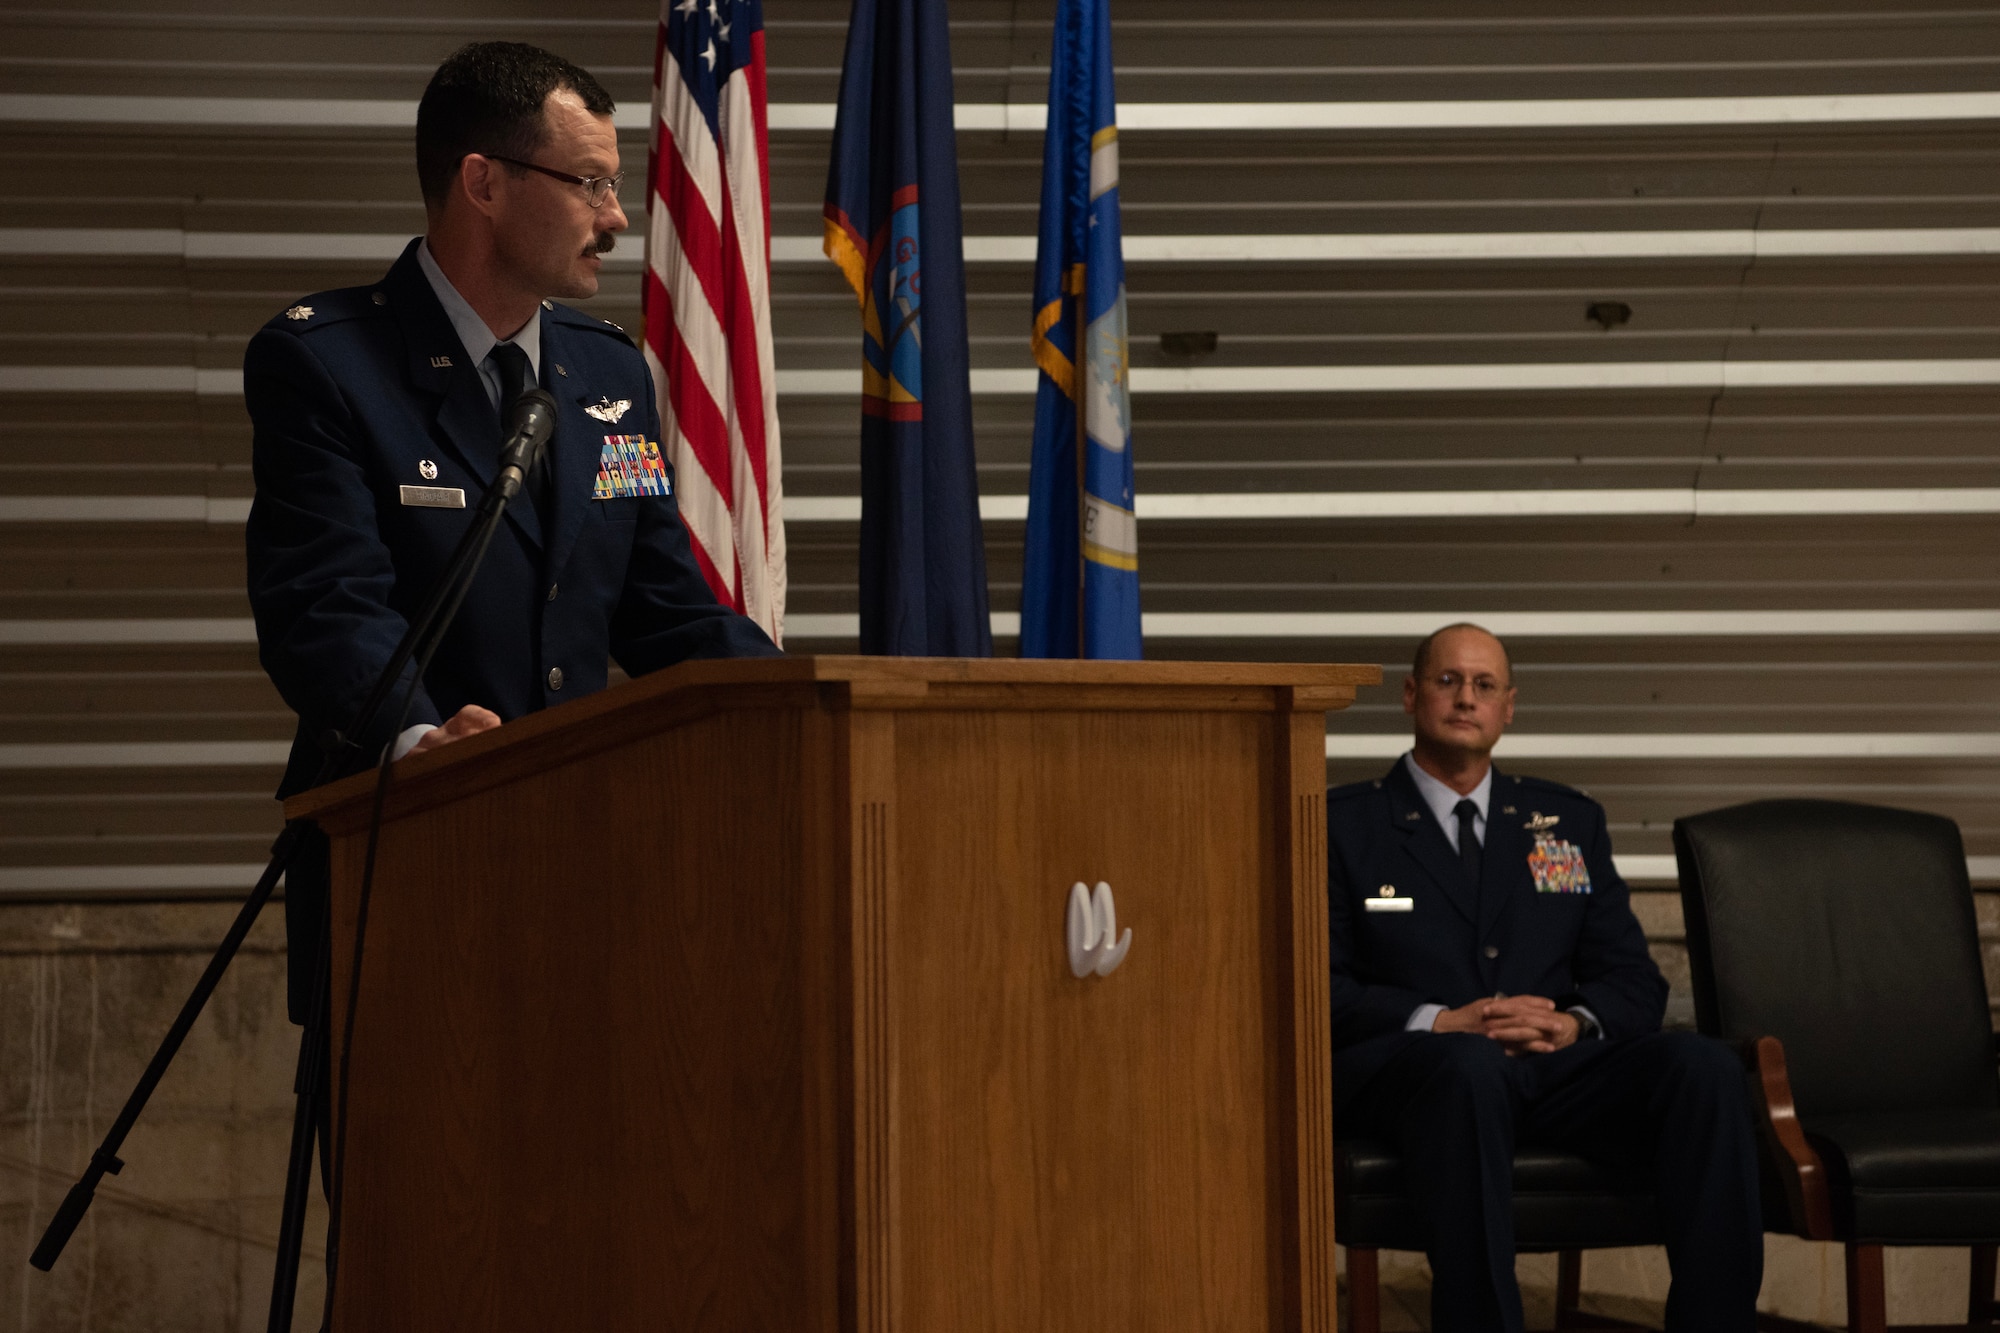 The new Lt. Col. of the 36th Tactical Advisory Squadron delivers a speech.